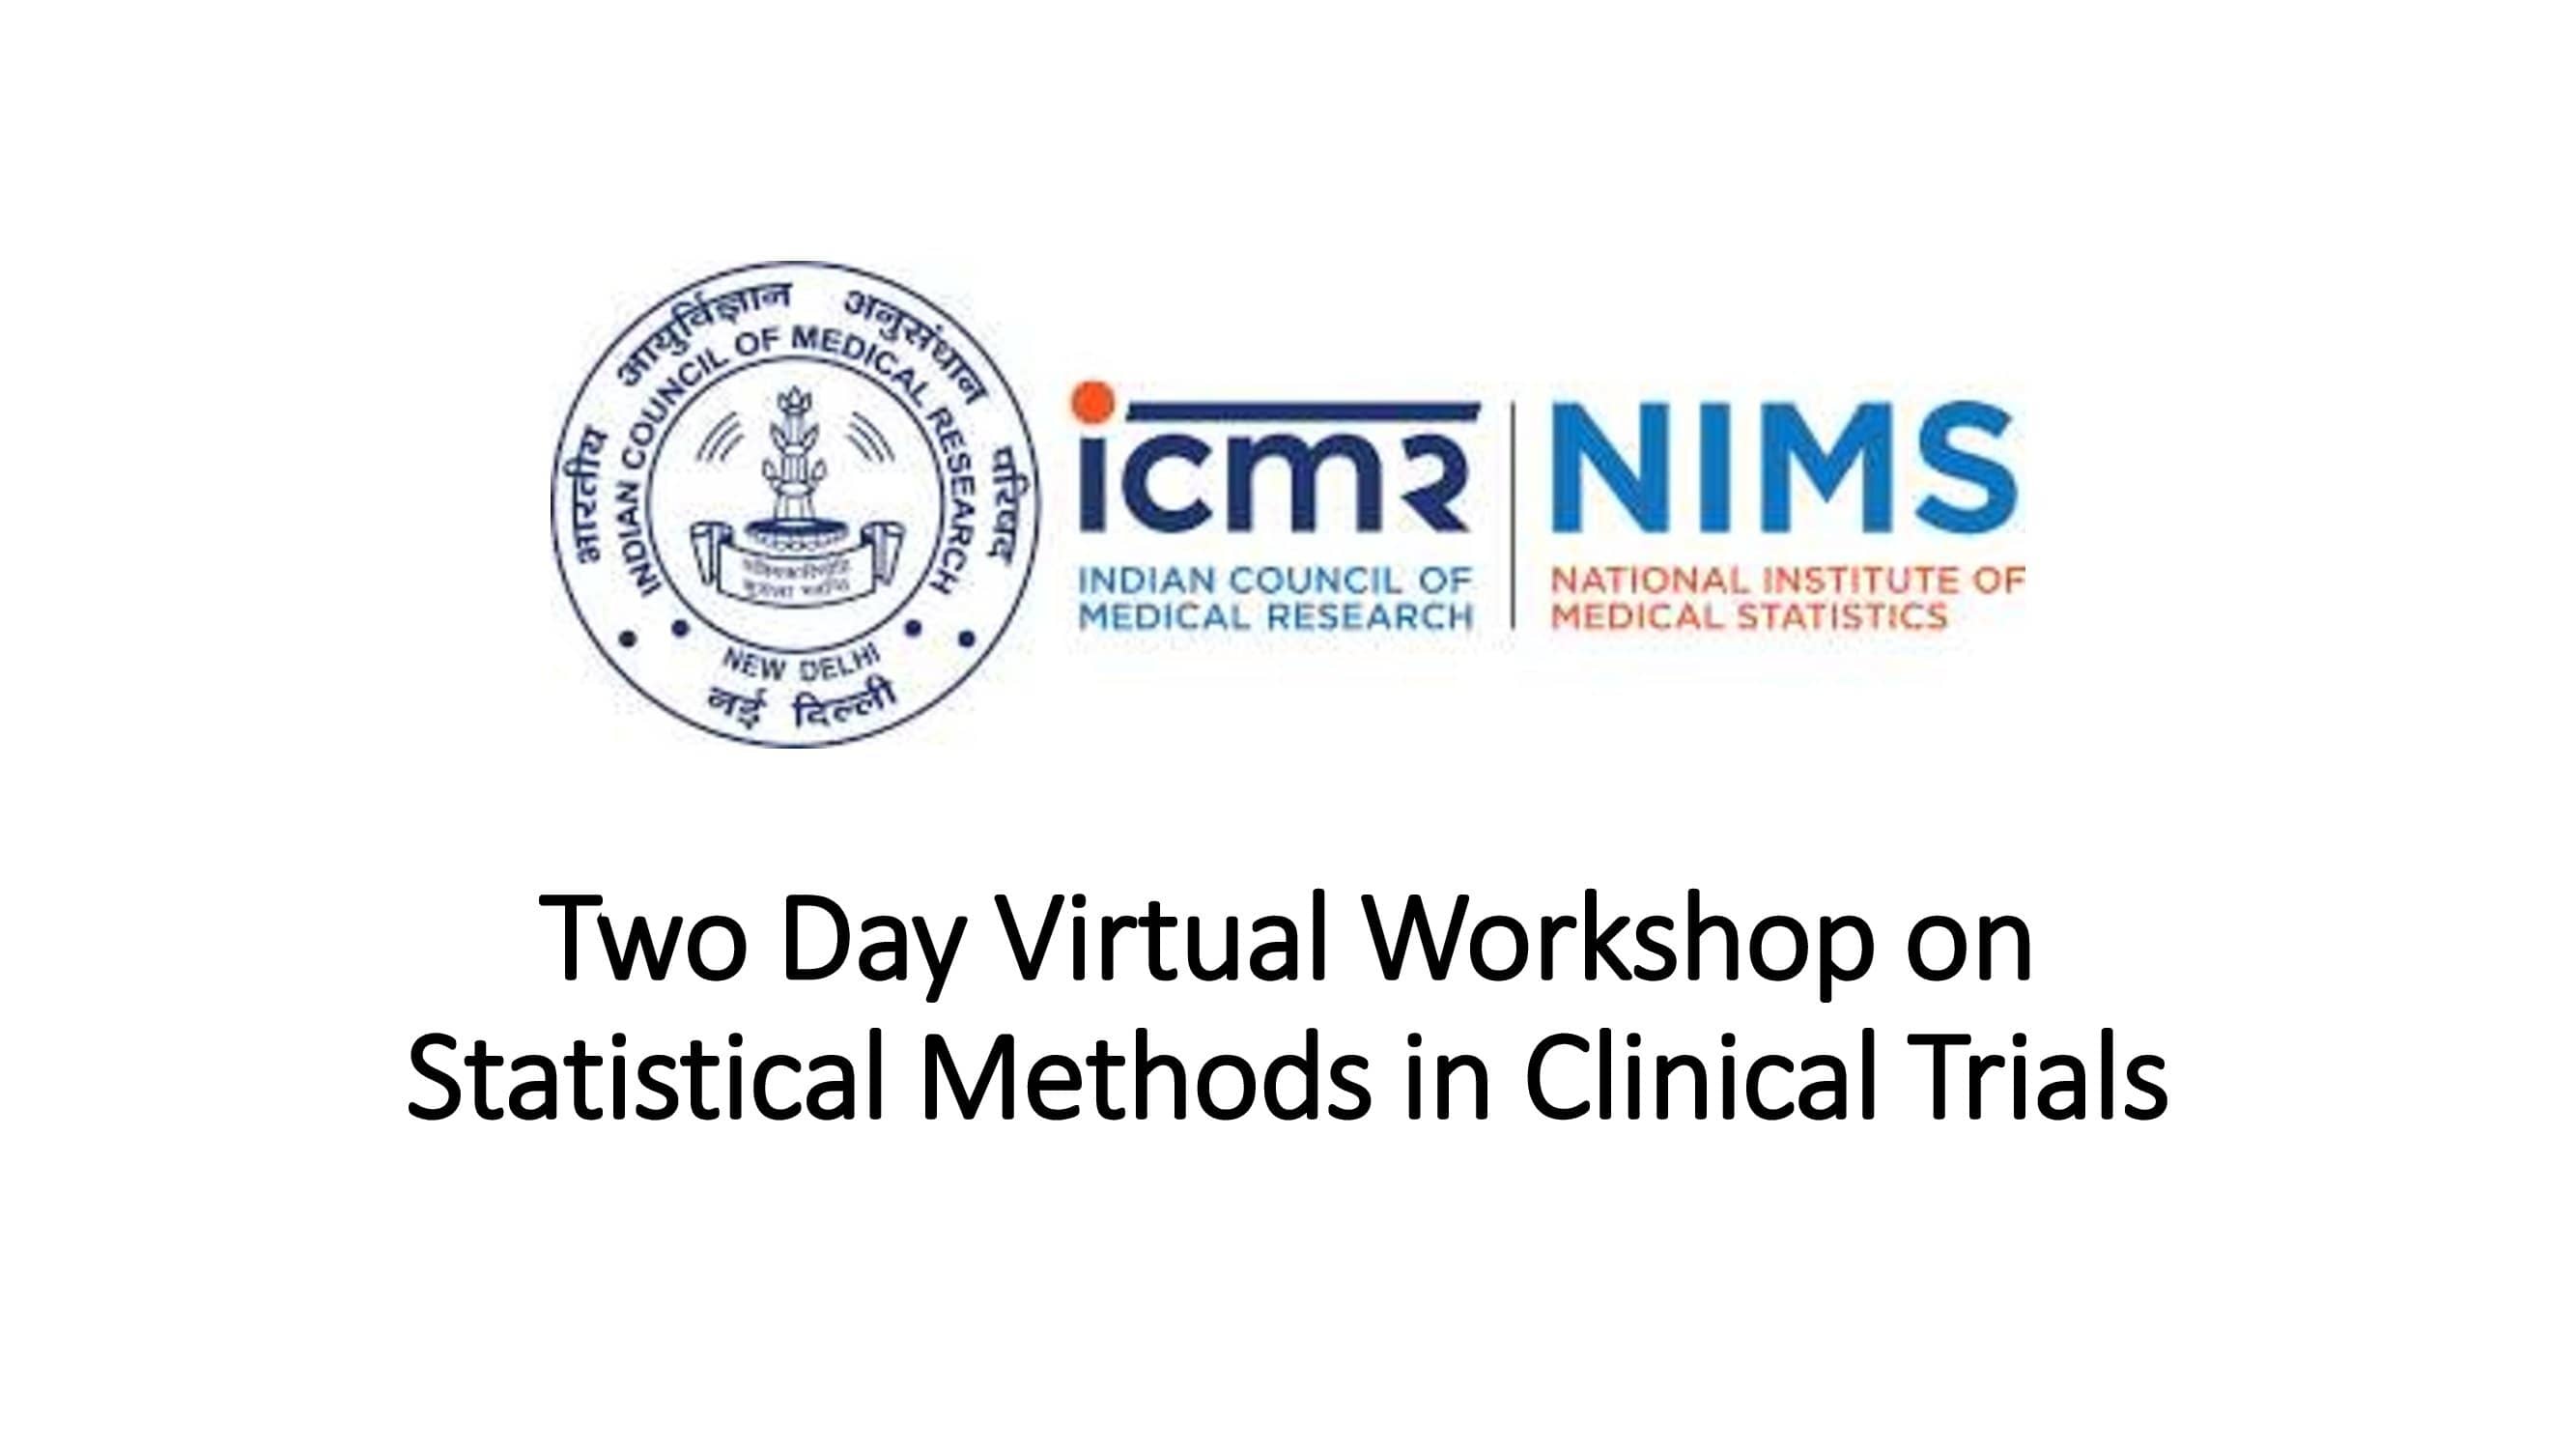 Two Day Virtual Workshop on Statistical Methods in Clinical Trials